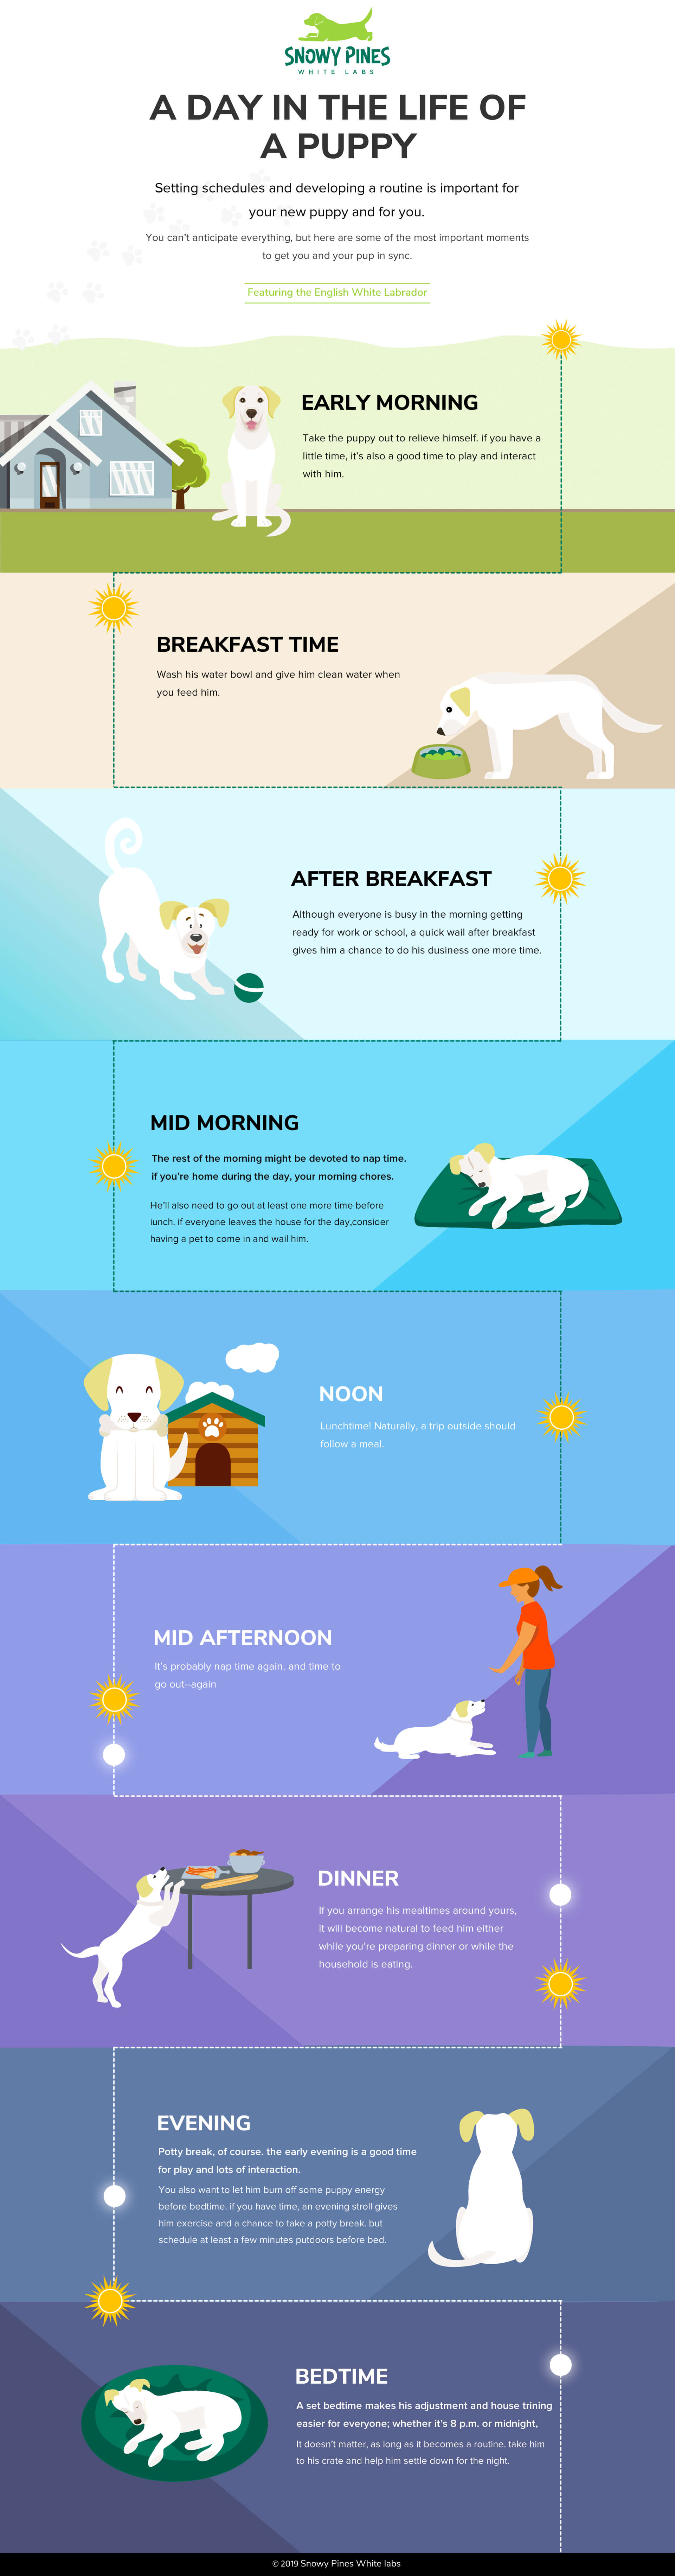 life of a puppy inforgraphic